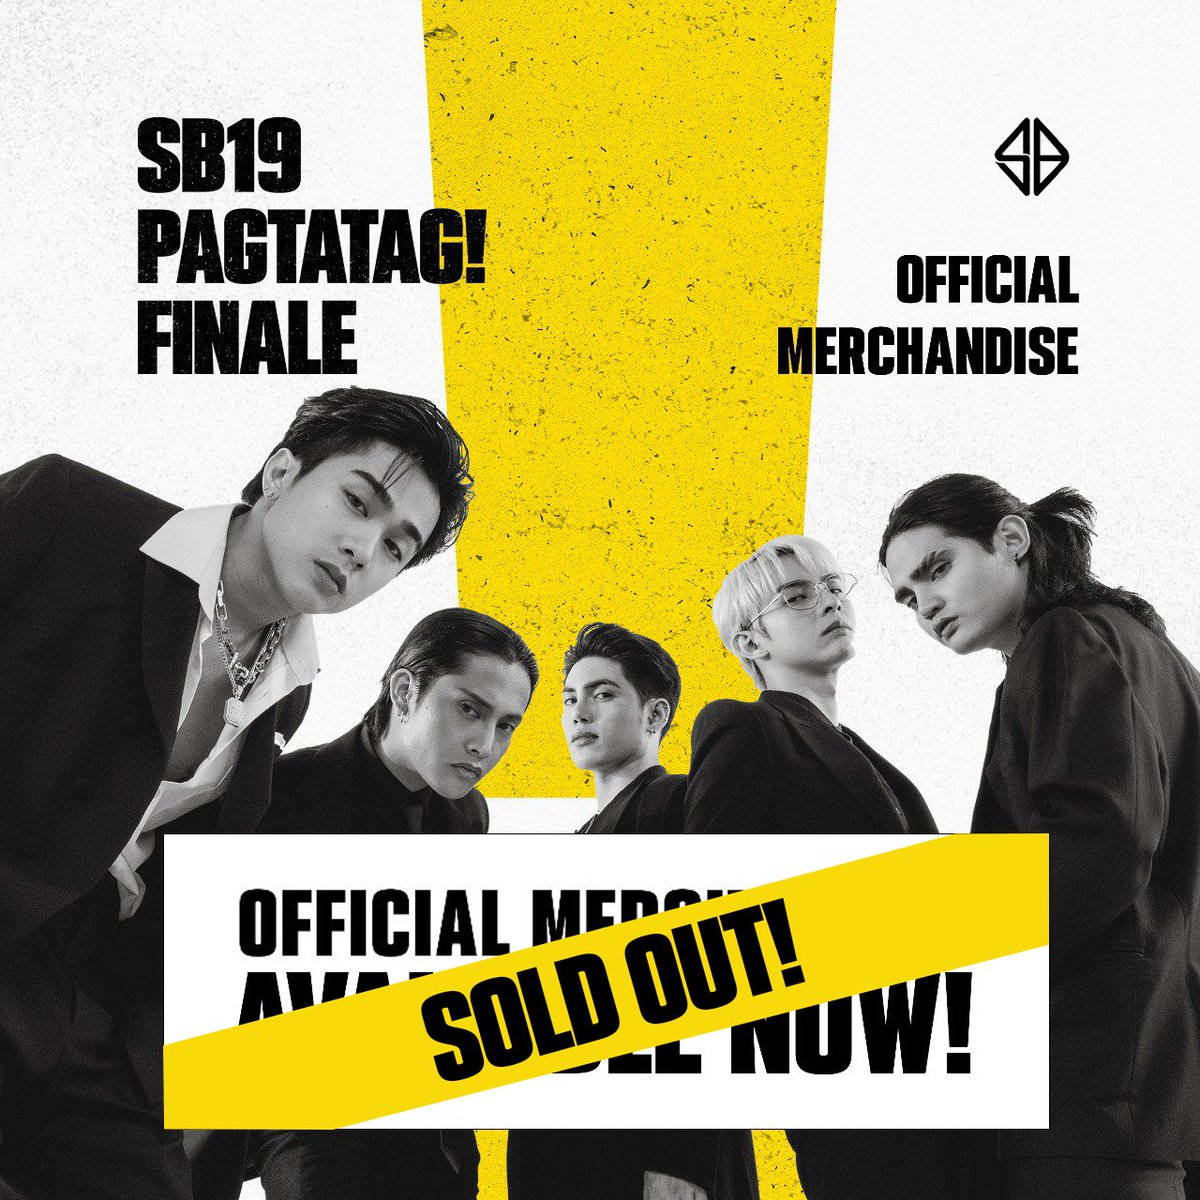 ⚠️ SB19 PAGTATAG! FINALE OFFICIAL MERCH

The SB19 PAGTATAG FINALE MERCH is now officially sold out! Thank you for your overwhelming support.

#PAGTATAG
#SB19PAGTATAG
#PAGTATAGFINALE